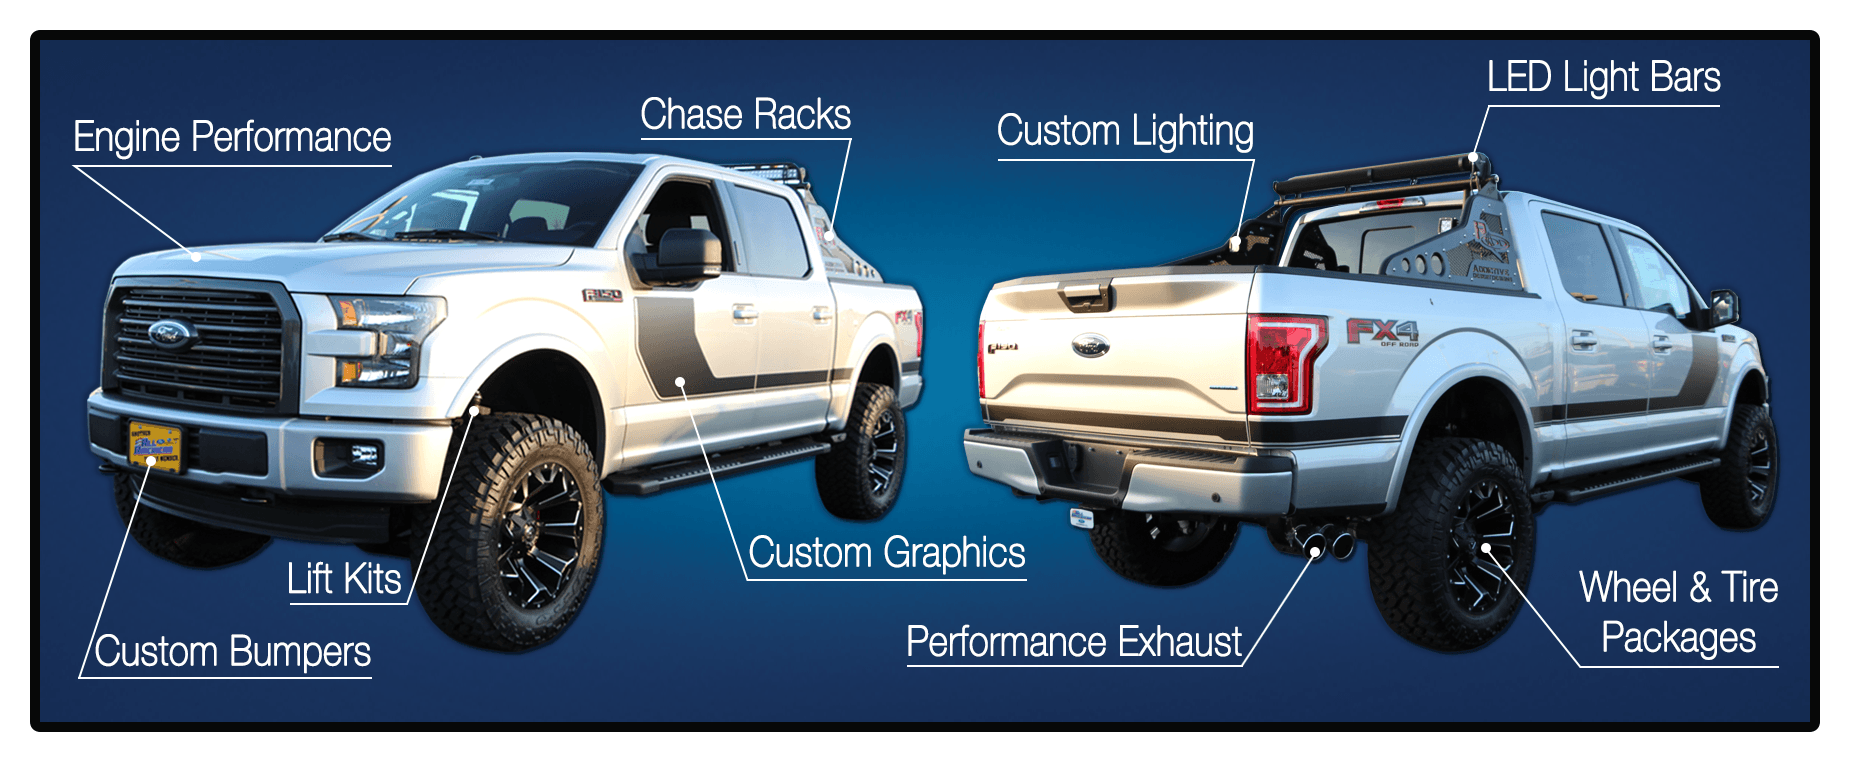 All American Ford in Old Bridge Custom Truck Options Diagram - Custom engine performance, bumpers, lift kits, chase racks, graphics, lighting, performance exhaust, LED light bars, and wheel & tire packages available from All American Ford in Old Bridge